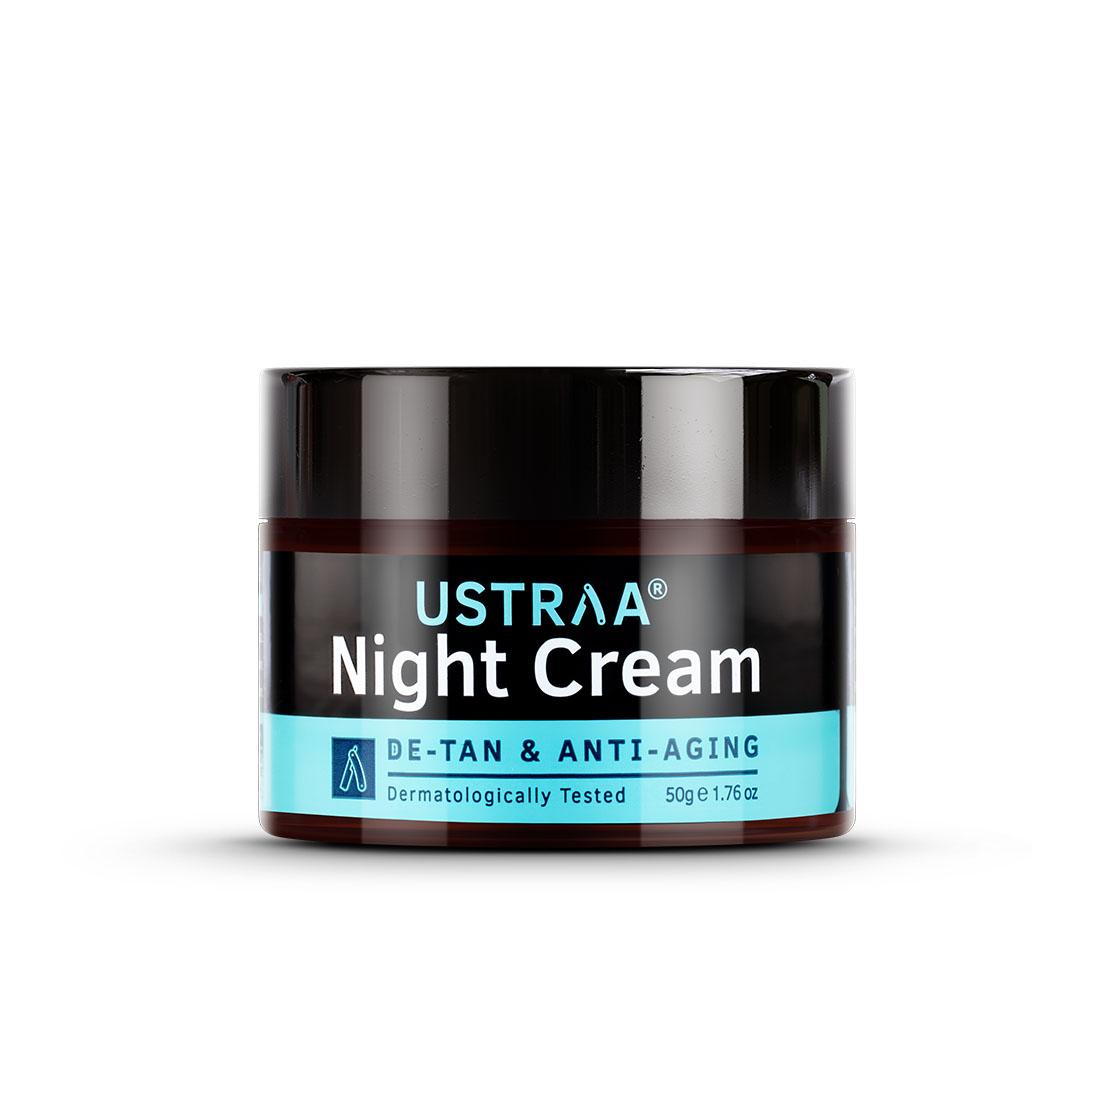 USTRAA HAIR CREAM REVIEWDAILY USE CREAM REVIEWGAVE ME SEVERE HEADACHE   YouTube